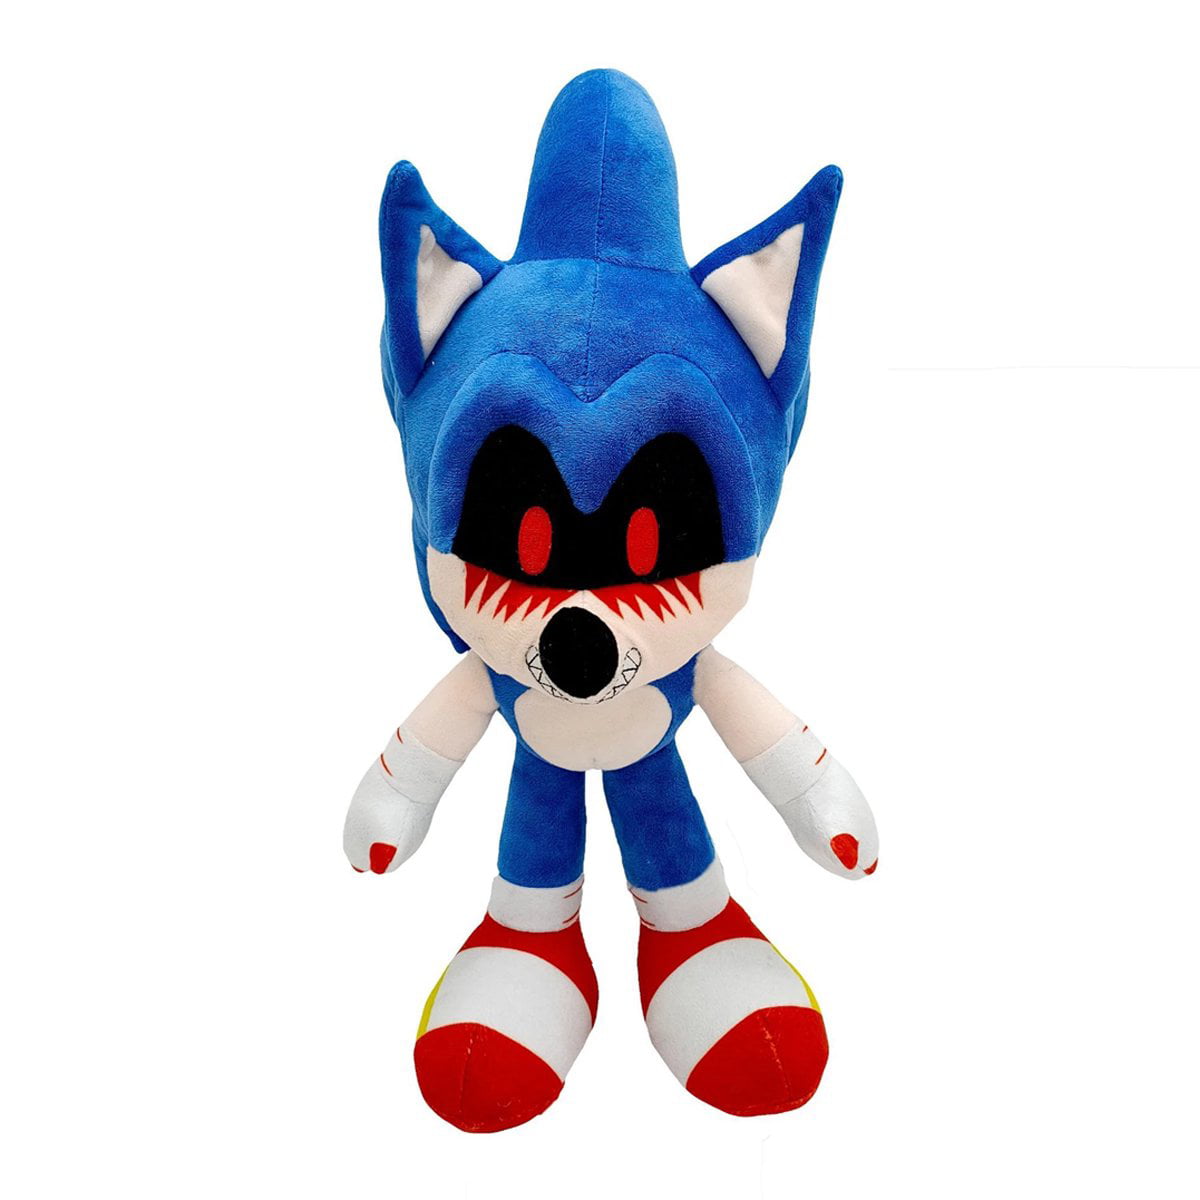 Soft and Cuddly 12 inch Sonic The Hedgehog Plush Toys Shadow and Knuckles Sonic Plush Stuffed Animal Toy,Sonic Series Action Figures Plushies ShadowKnuckles Sonic Toys for Boys and Girls 